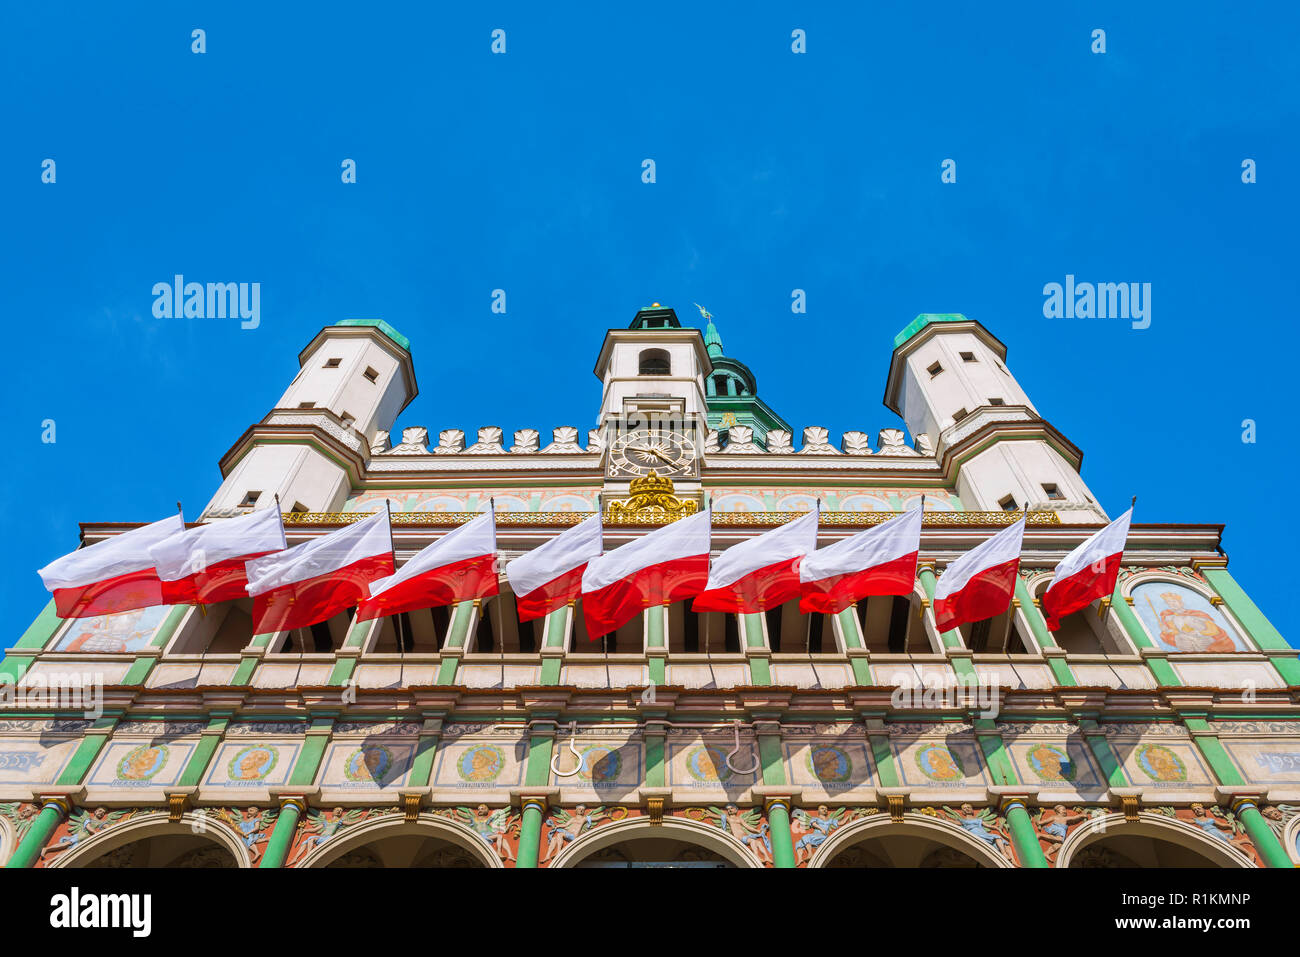 Town Hall Poznan, view of the upper exterior of the Renaissance Town Hall building (Ratusz) in Market Square in the Old Town area of Poznan, Poland. Stock Photo